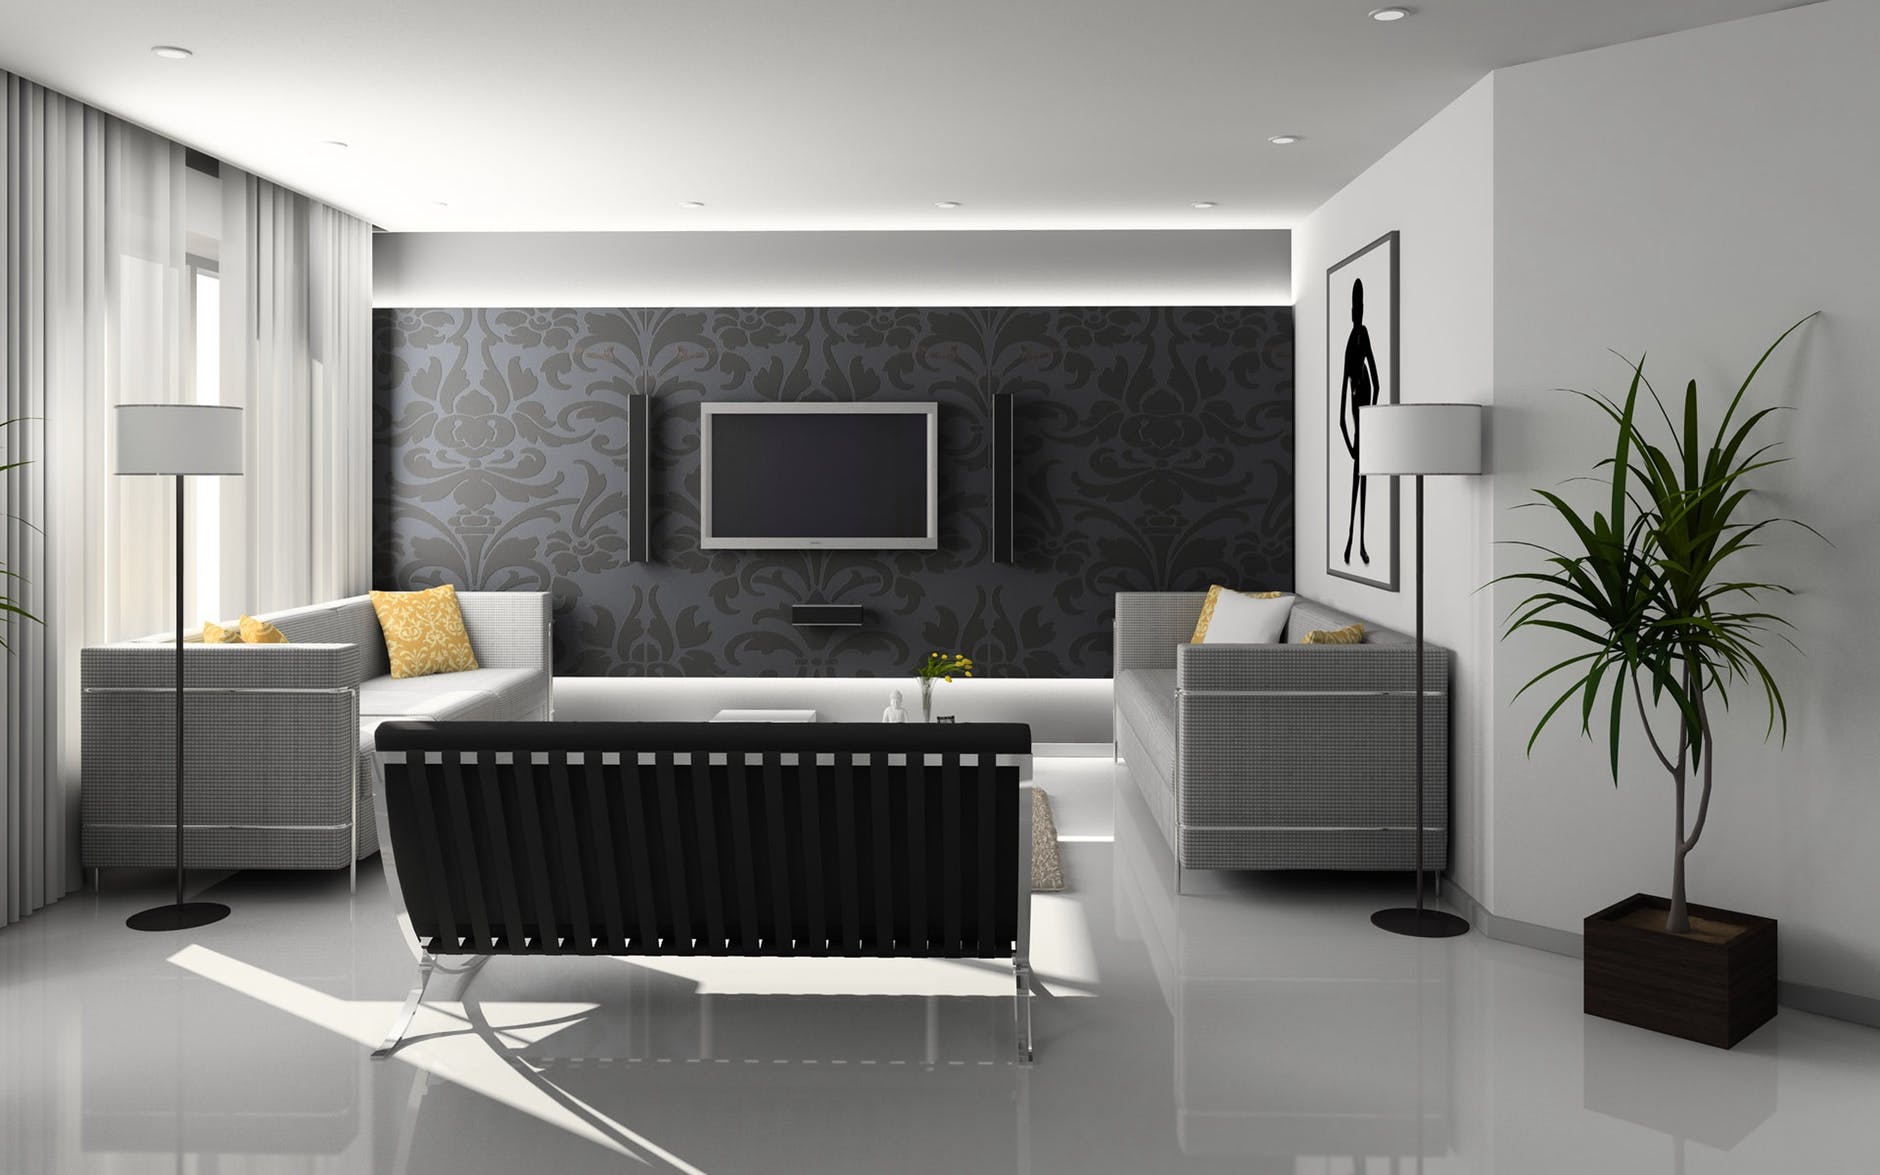 A living room with white walls and a black patterned accent wall, furnished with a black bench and gray couches